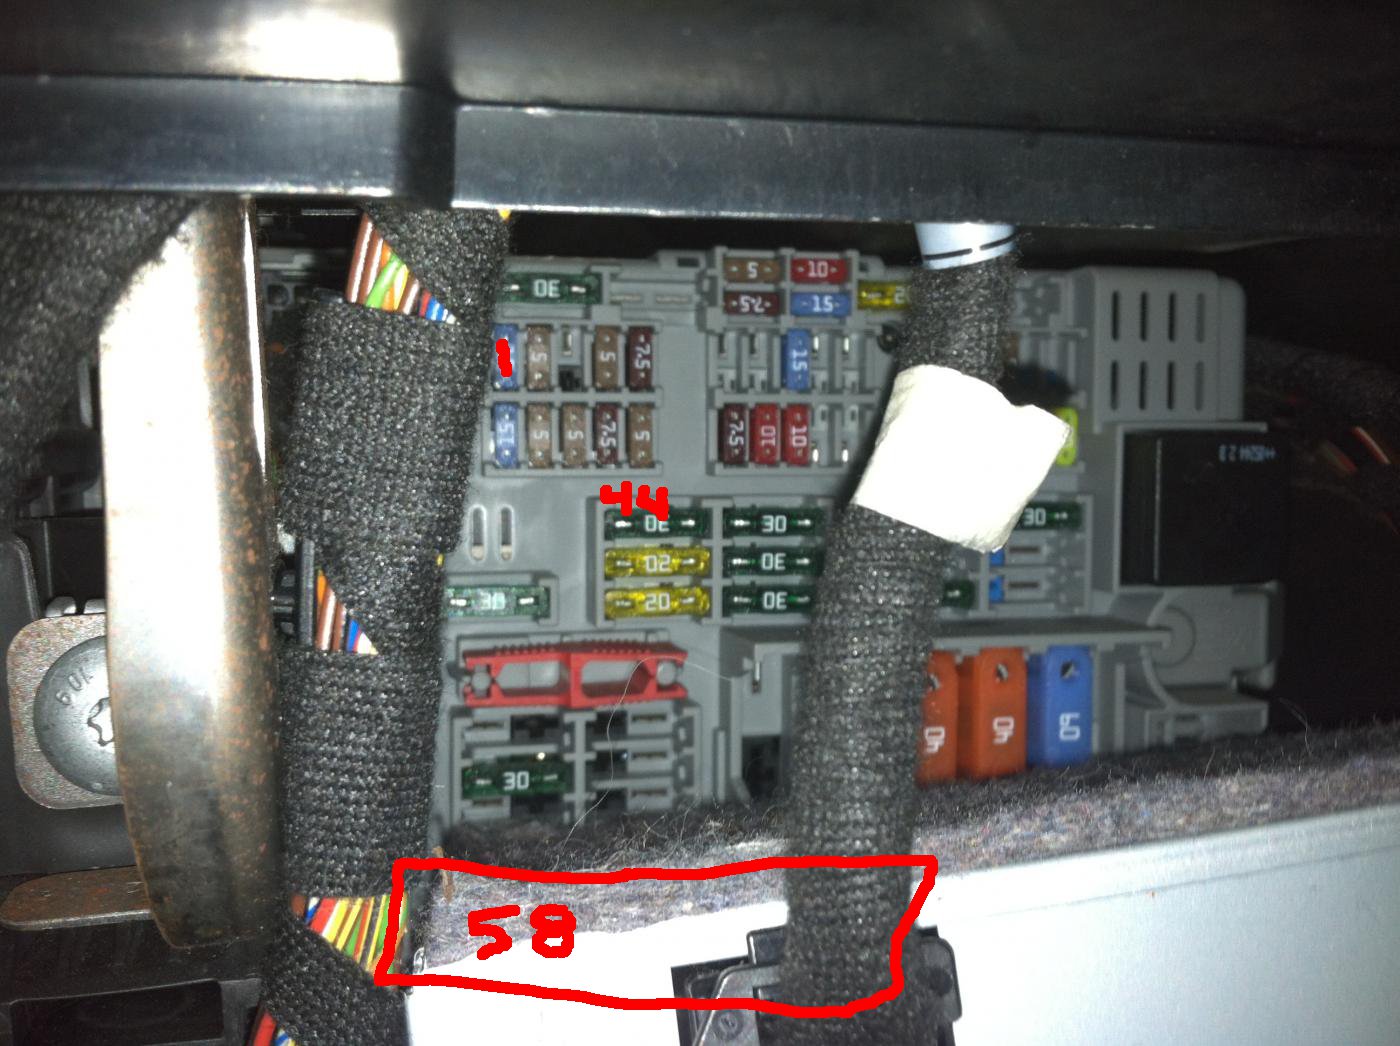 My fuse diagram doesn't seem to match ...